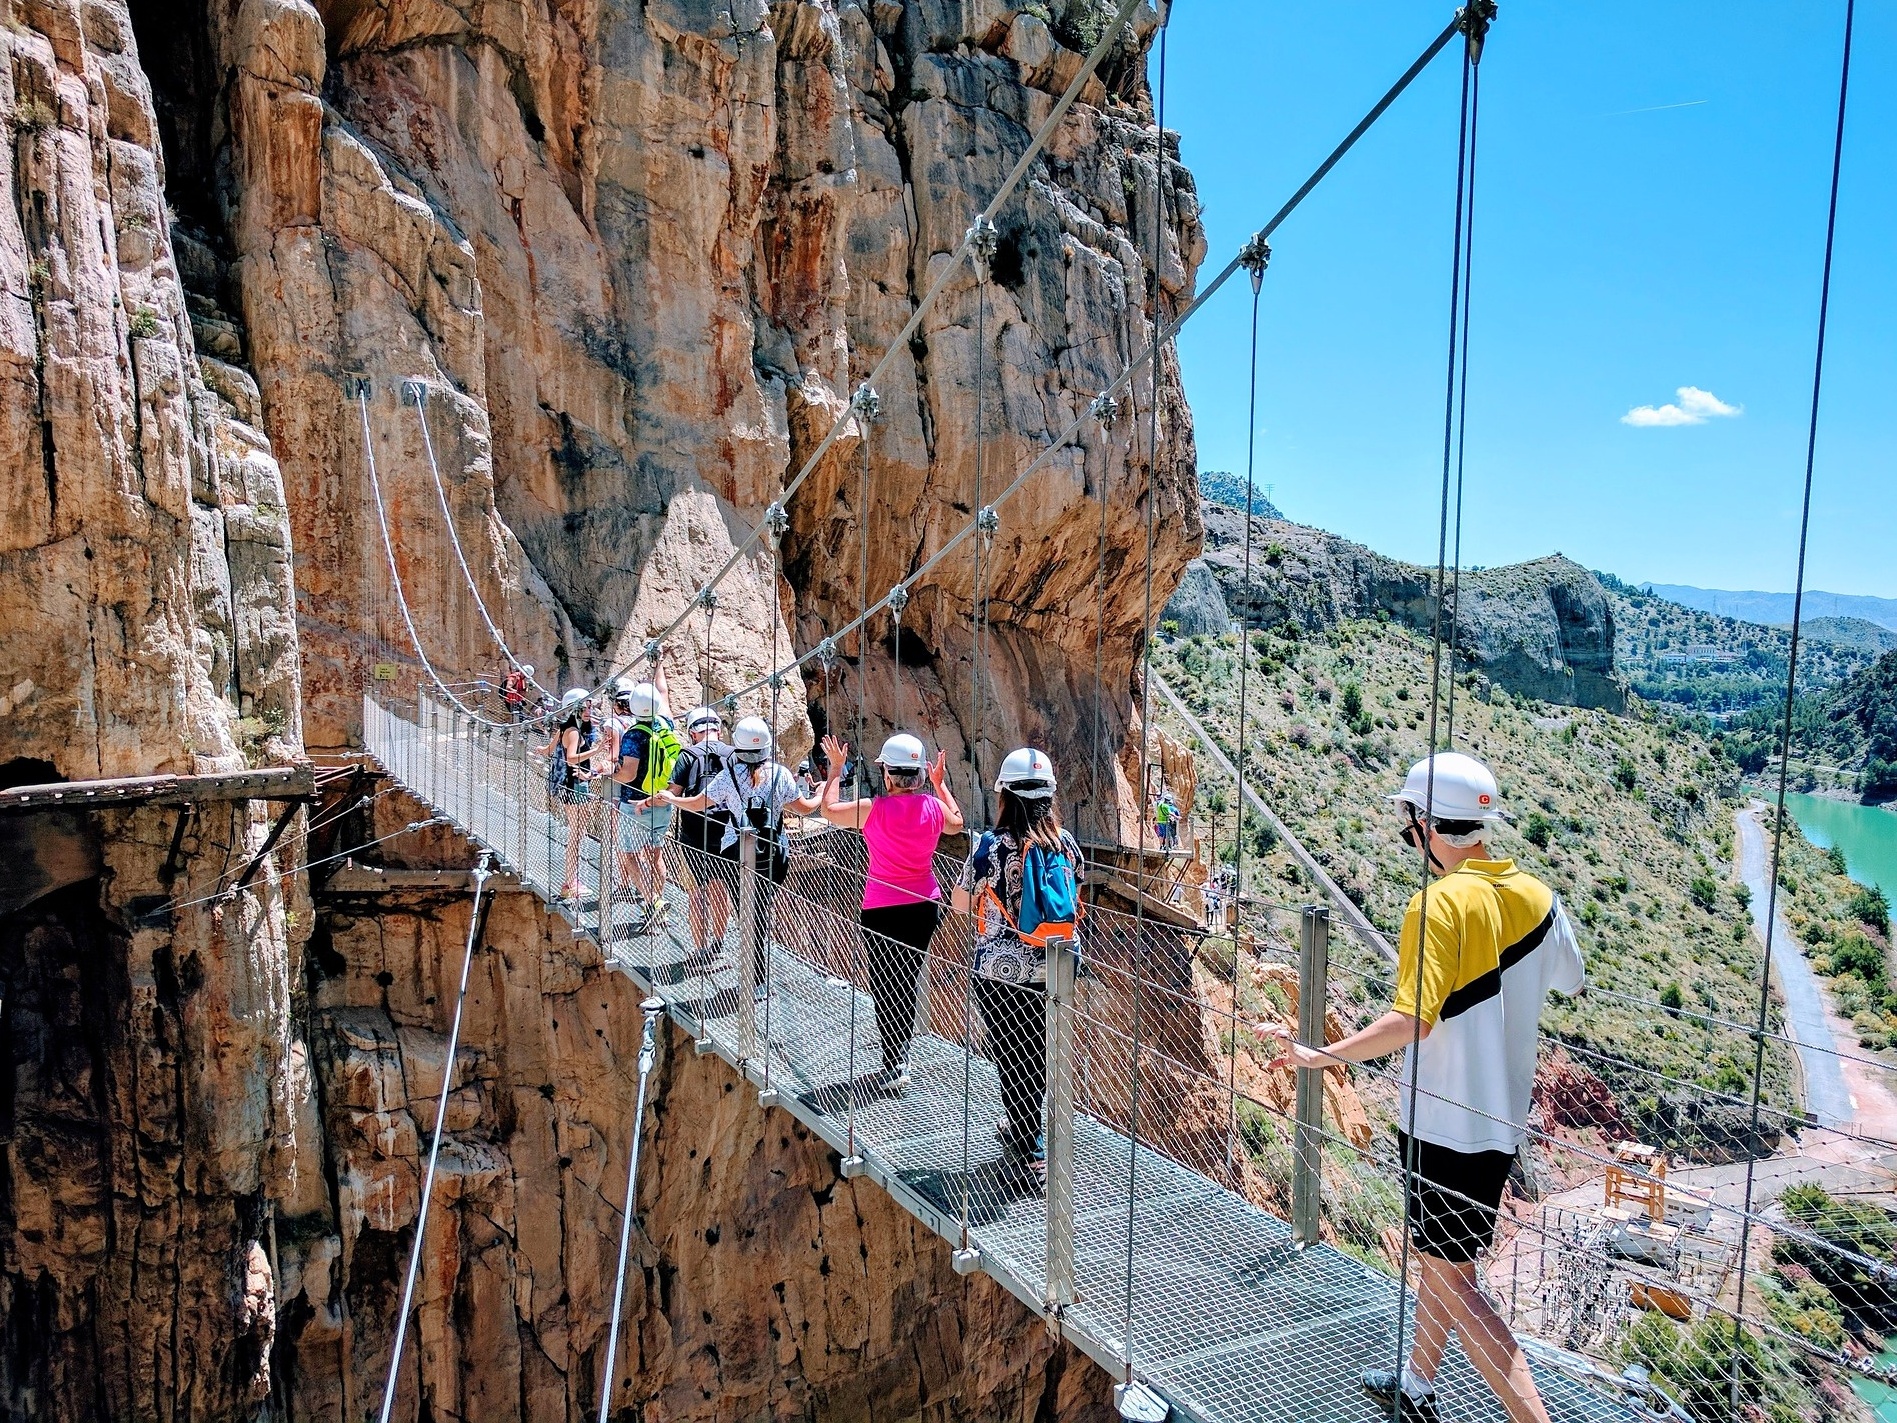 Tickets for the Caminito del Rey - The King's Little Pathway